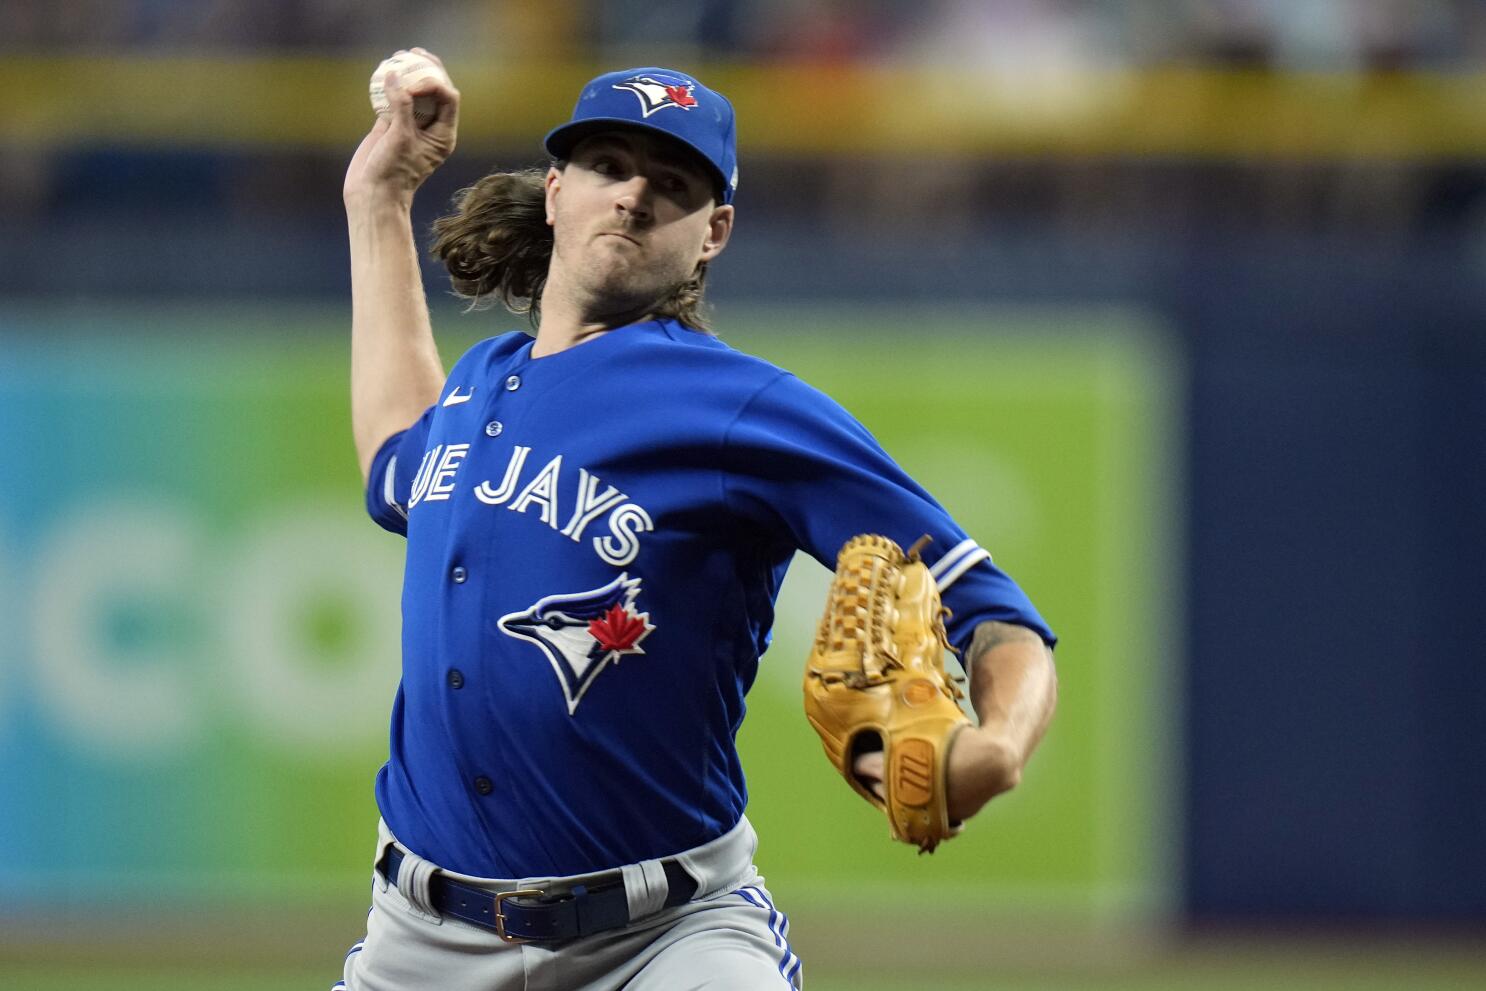 Was Kevin Gausman the wrong choice for Blue Jays in Game 1?